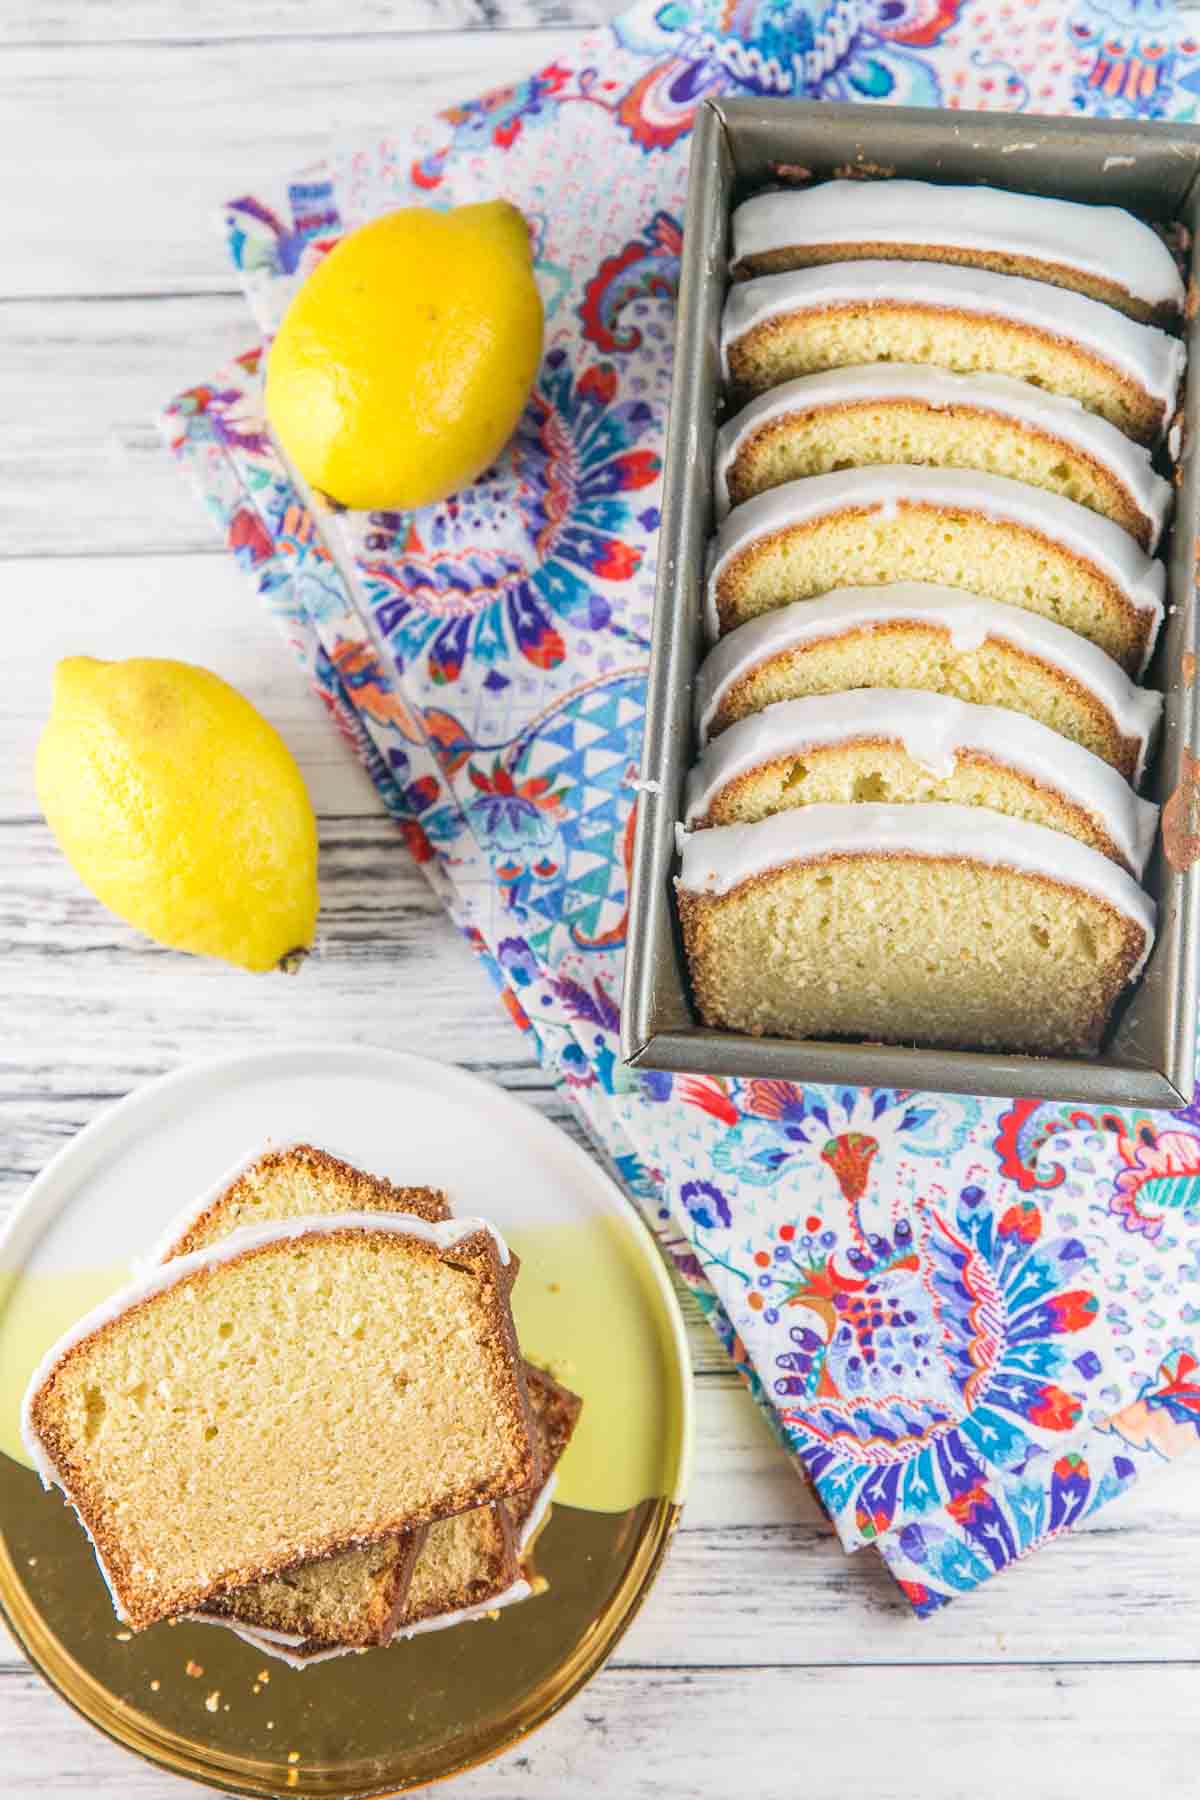 slices of glazed lemon pound cake arranged on a yellow plate and in a loaf pan